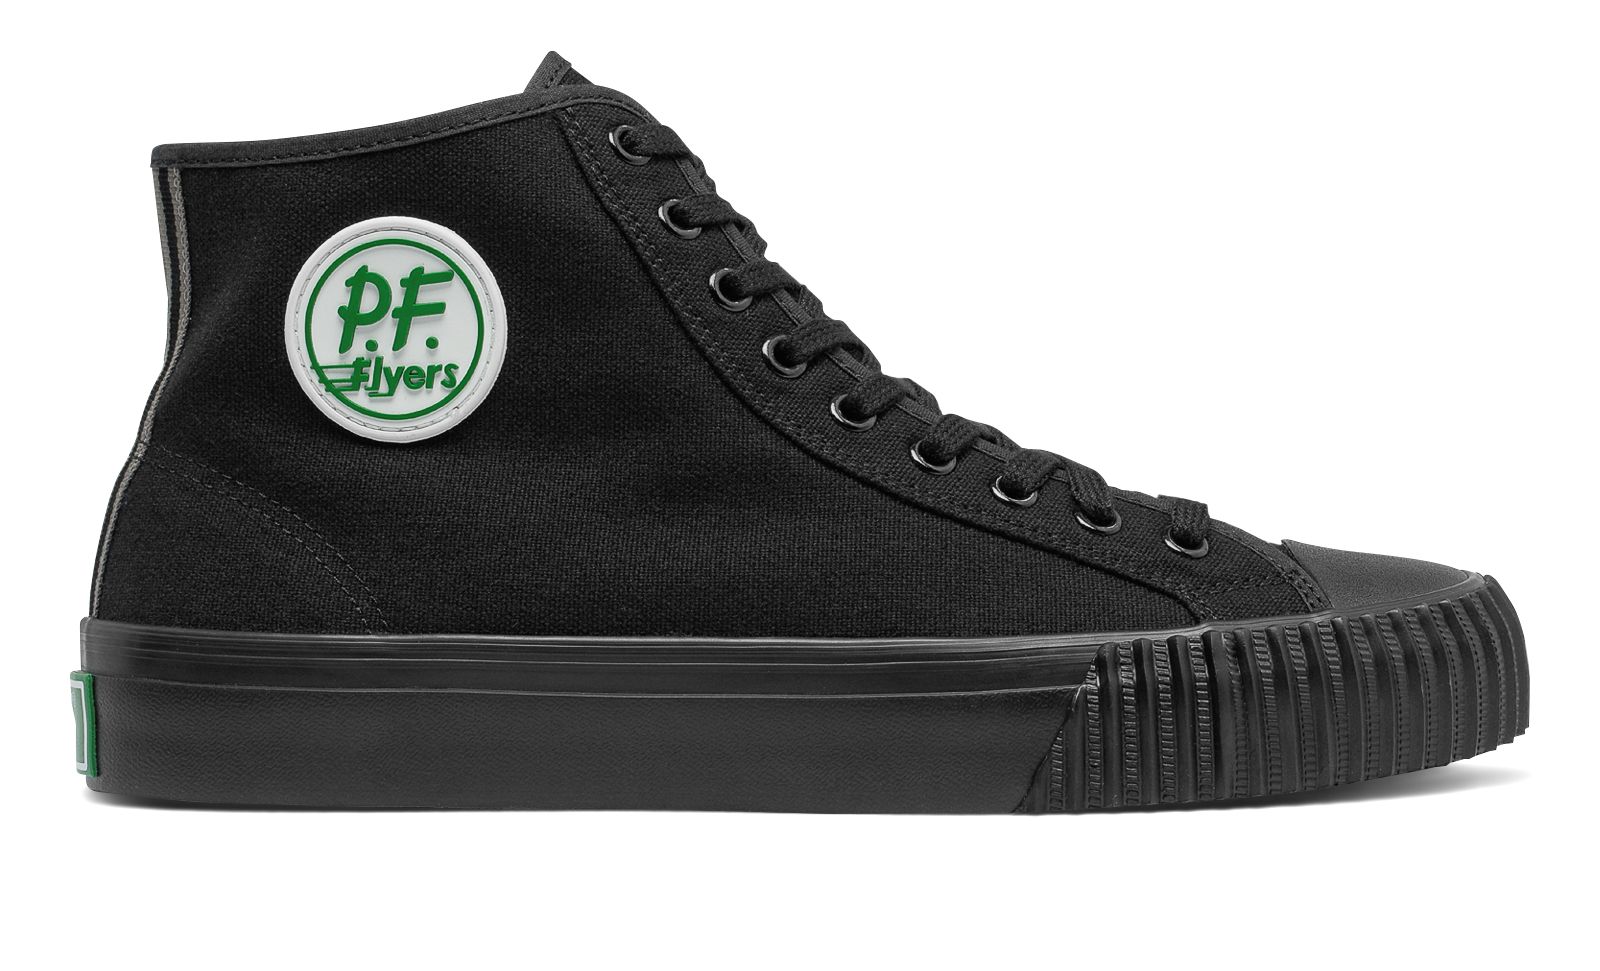 are pf flyers converse